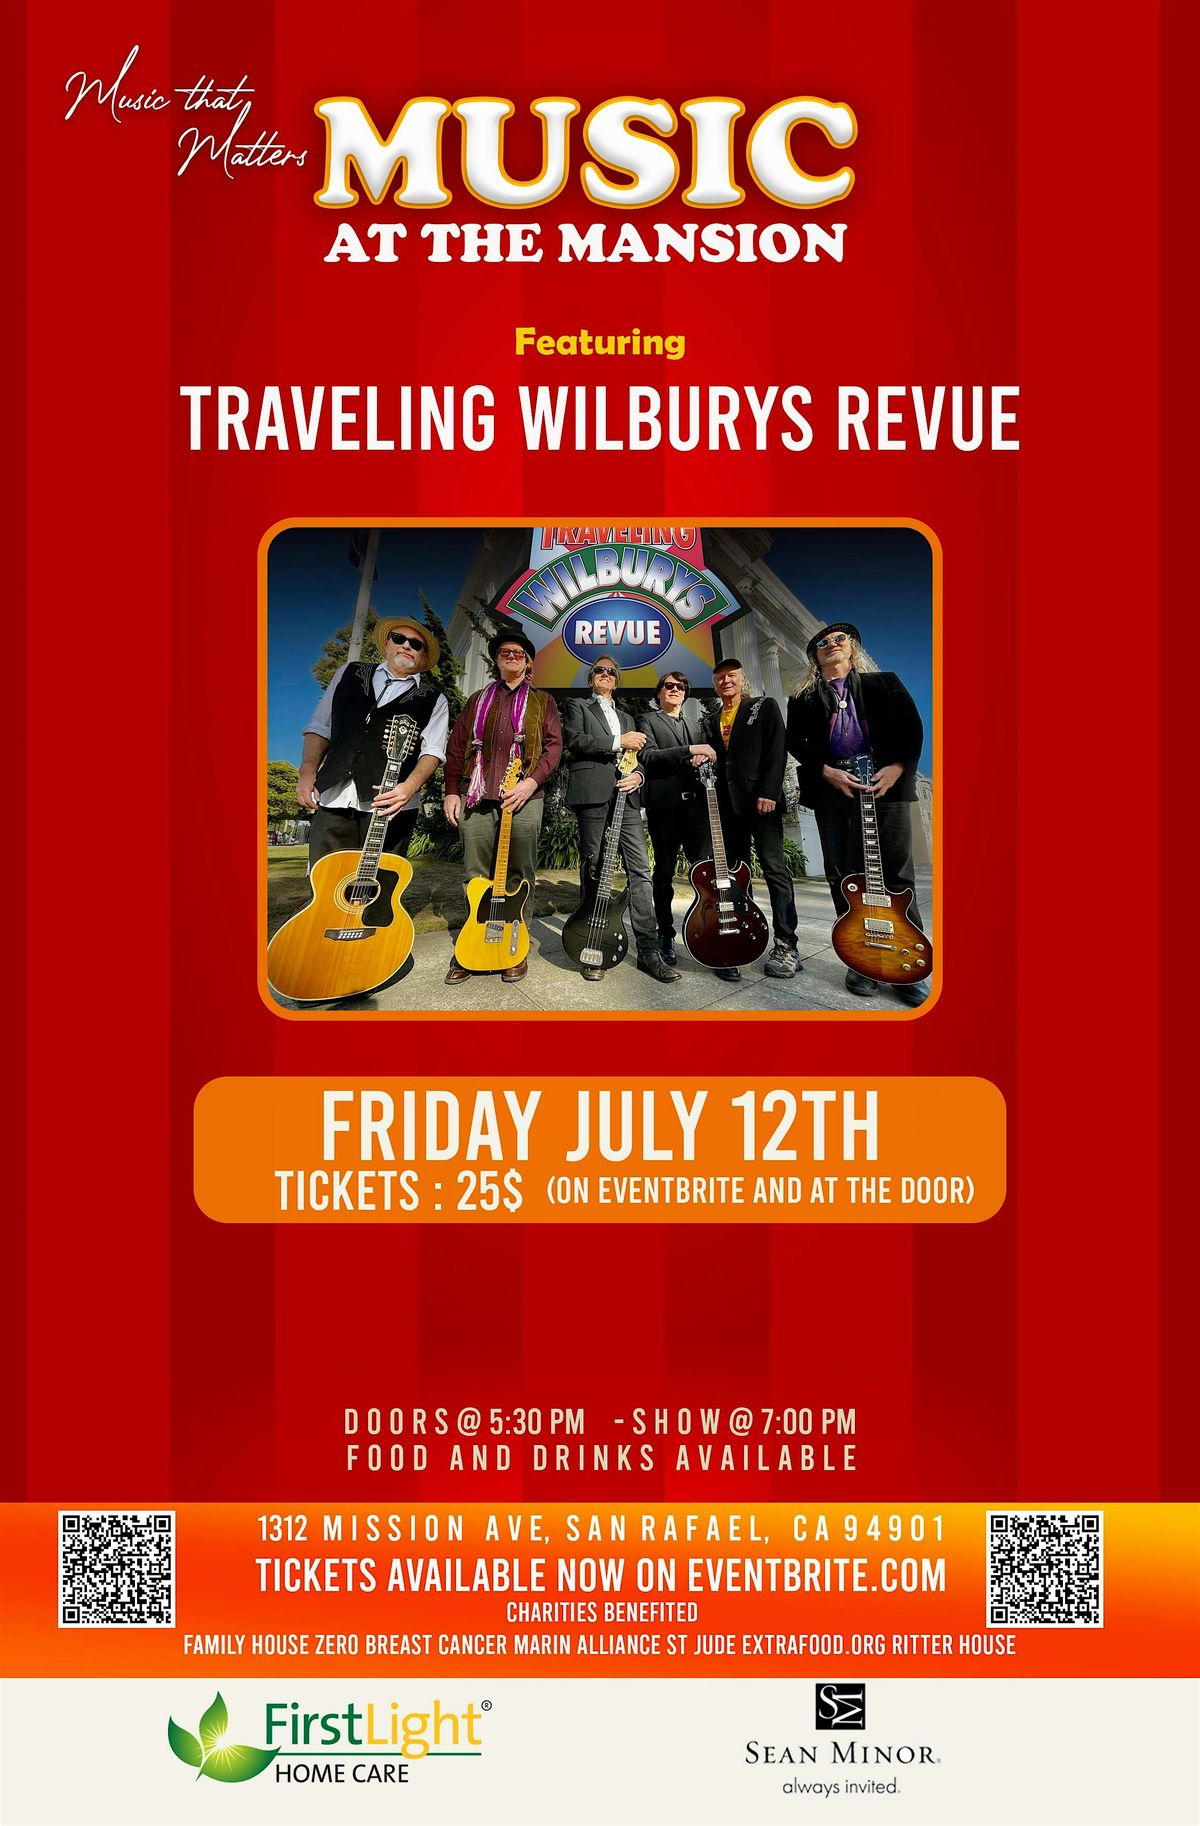 Music at the Mansion presents The Traveling Wilbury Review July 12th